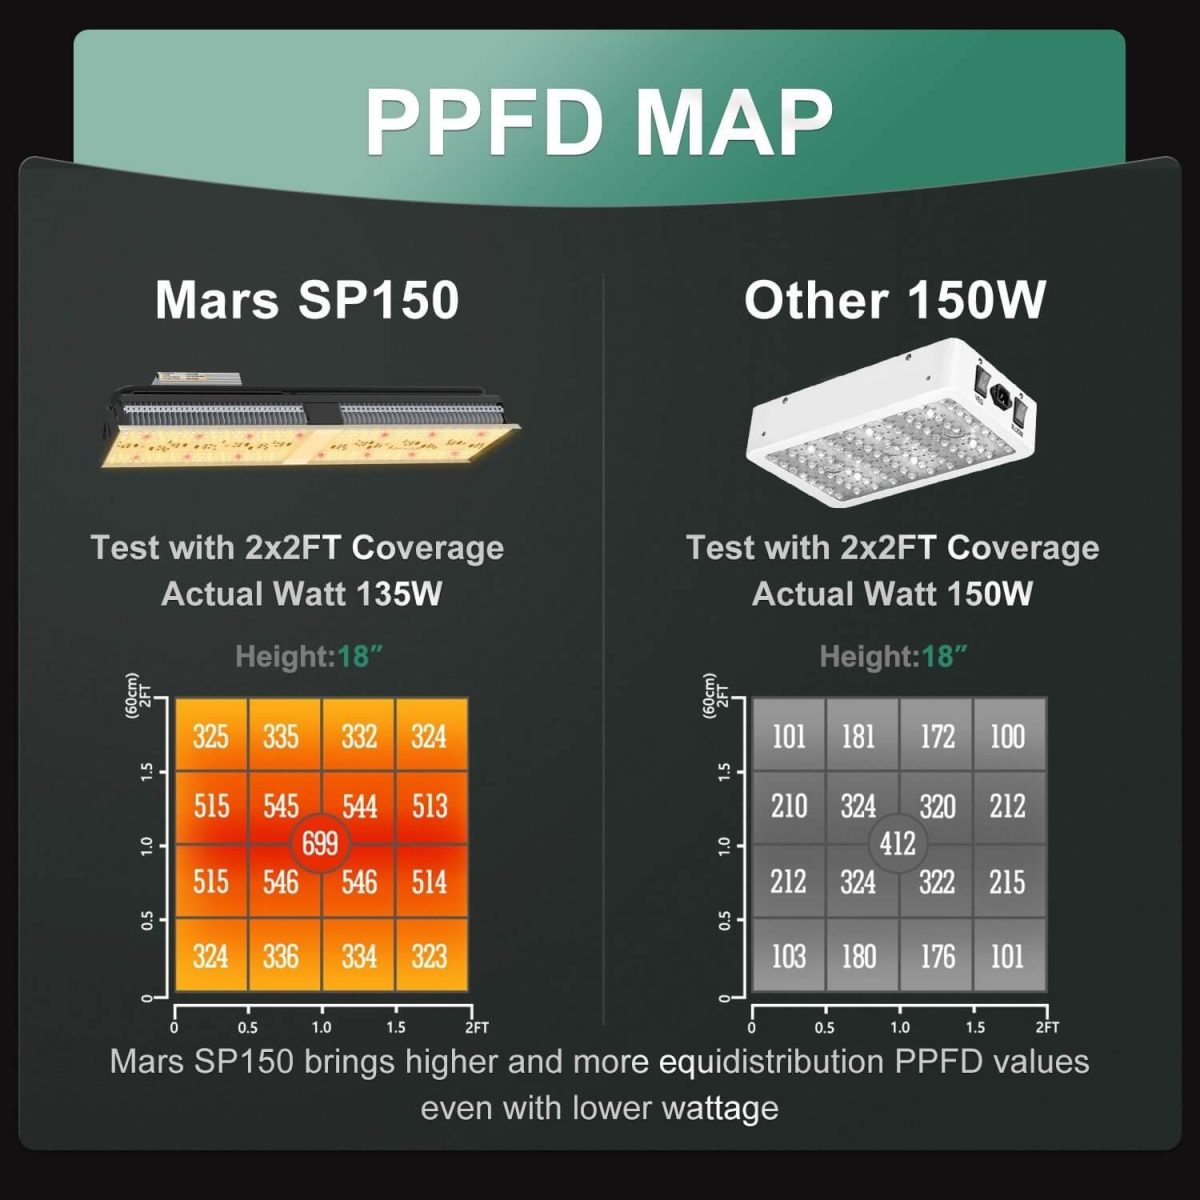 True 135W, test in 2x2 tent, the ppfd of sp150 is higher than other 150w led